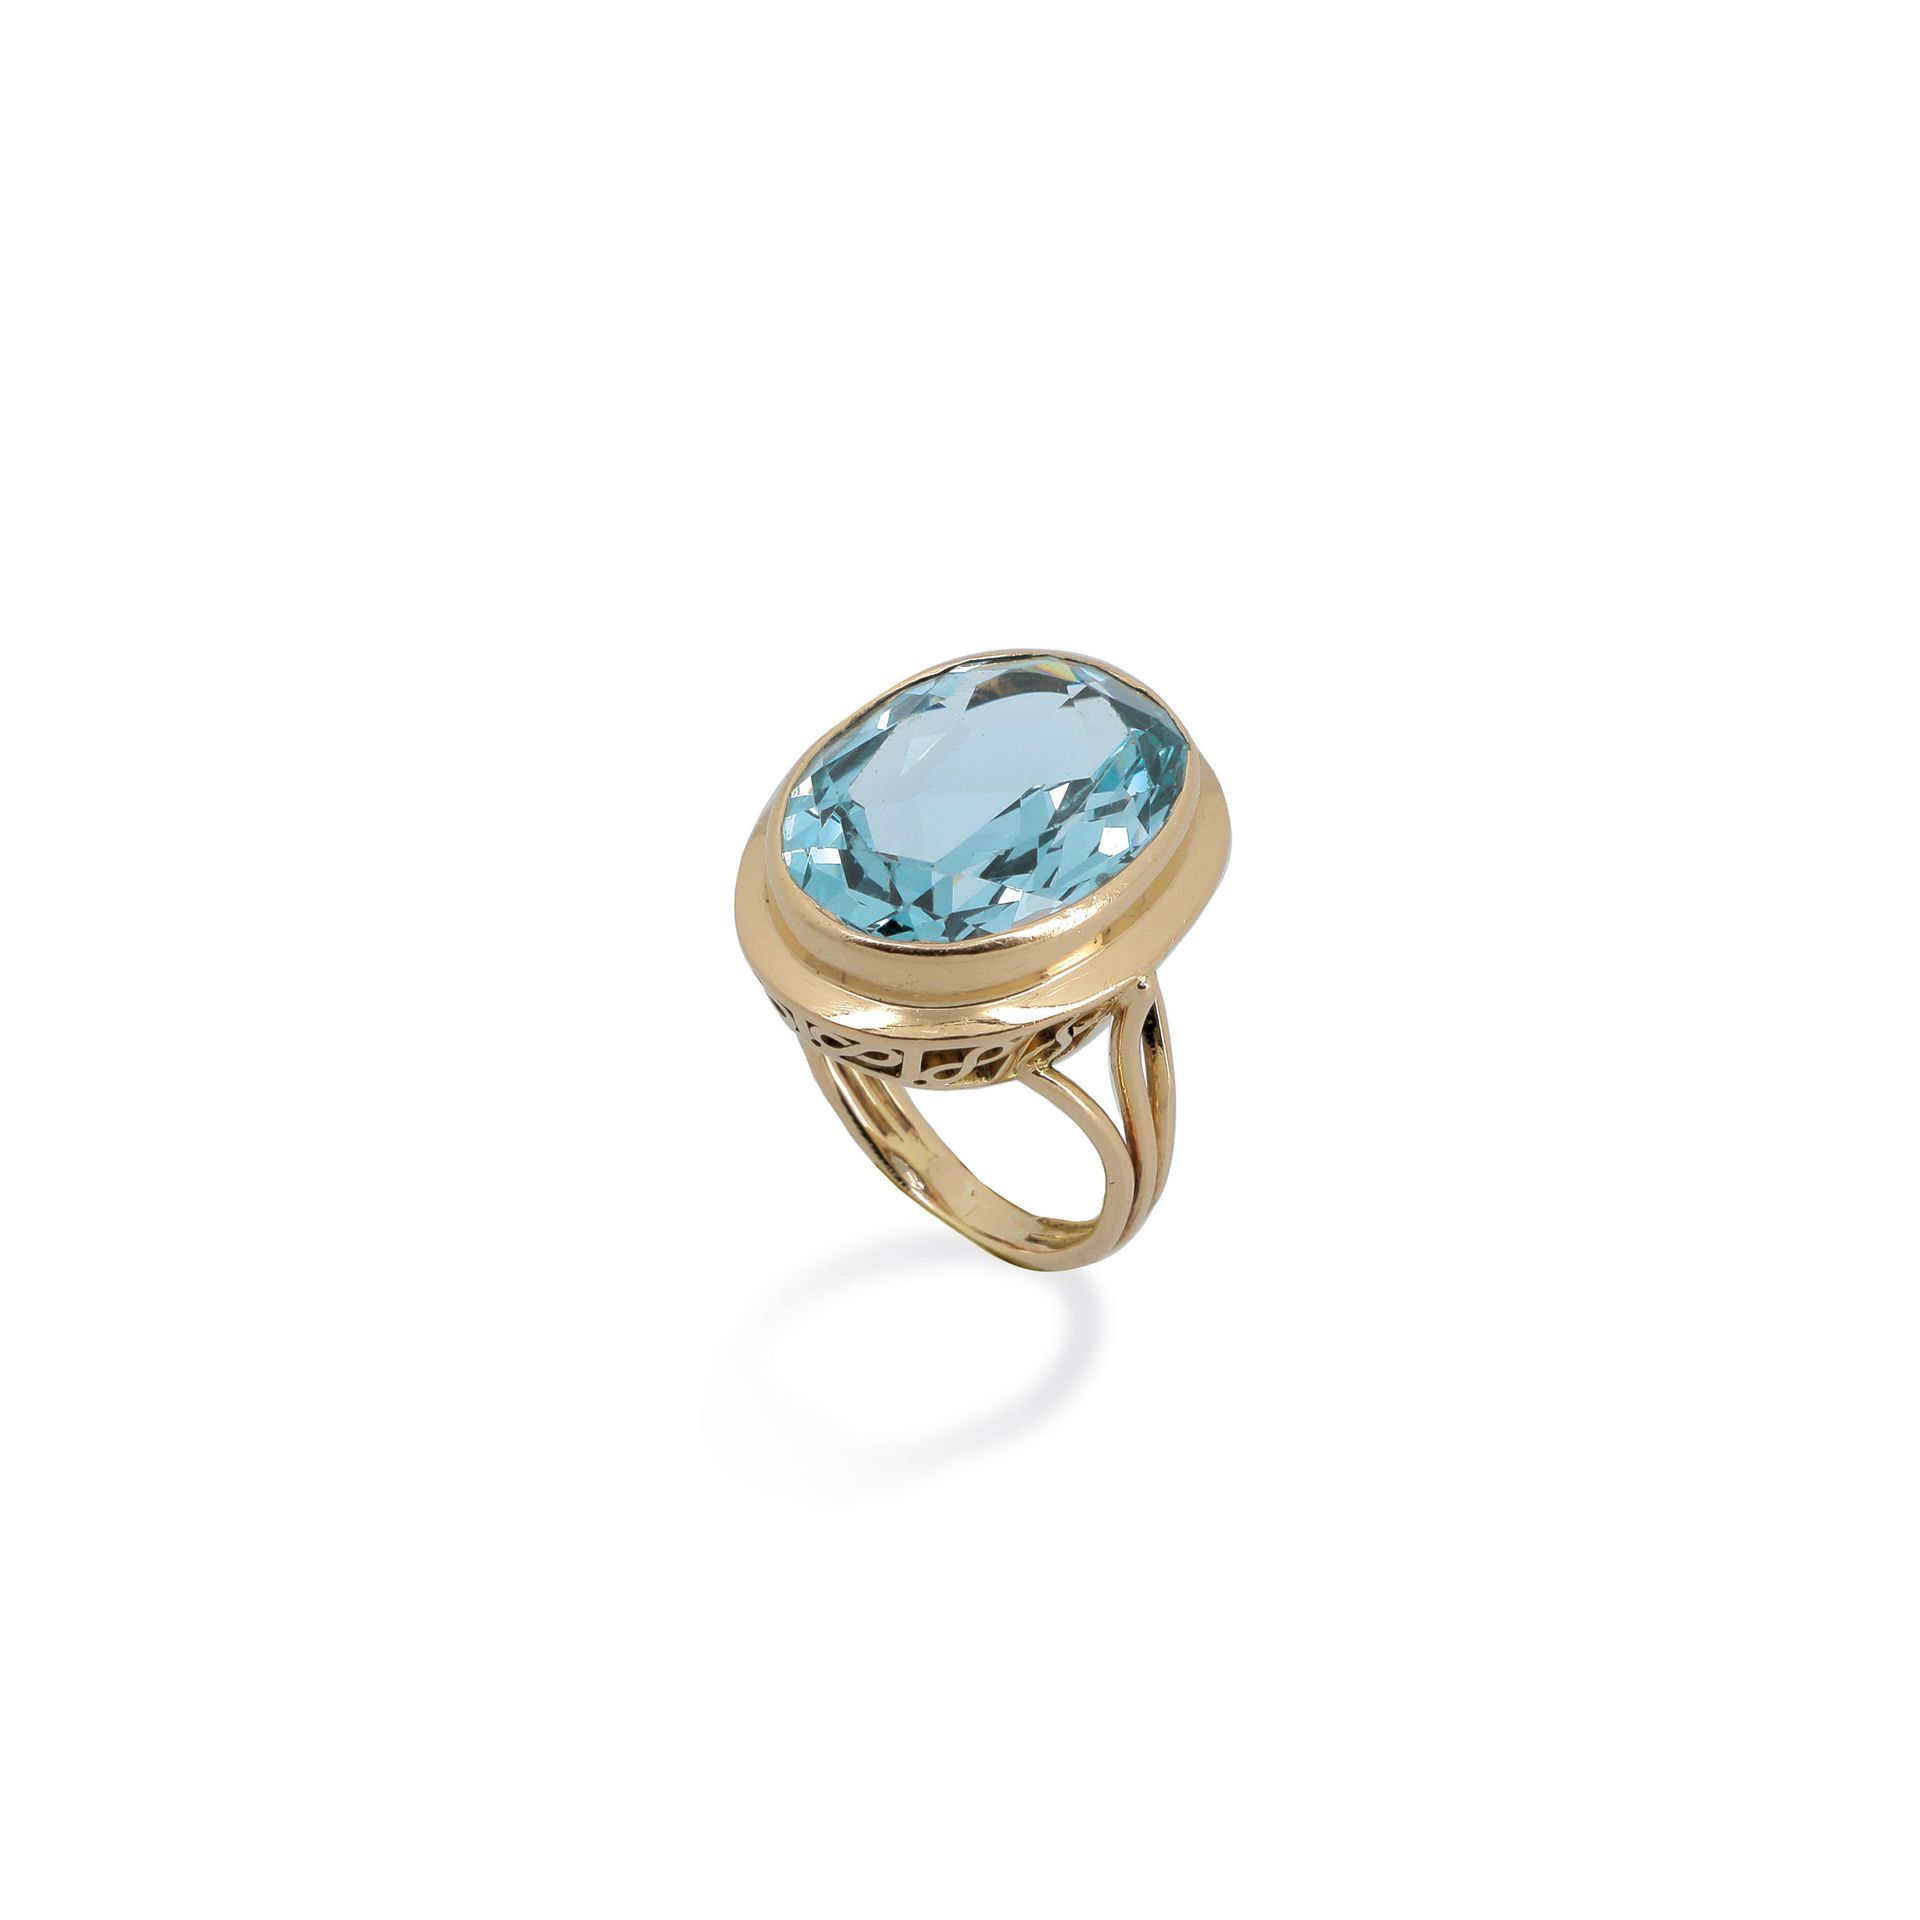 Null RING

Openwork yellow gold ring set with a large oval aquamarine.

An aquam&hellip;